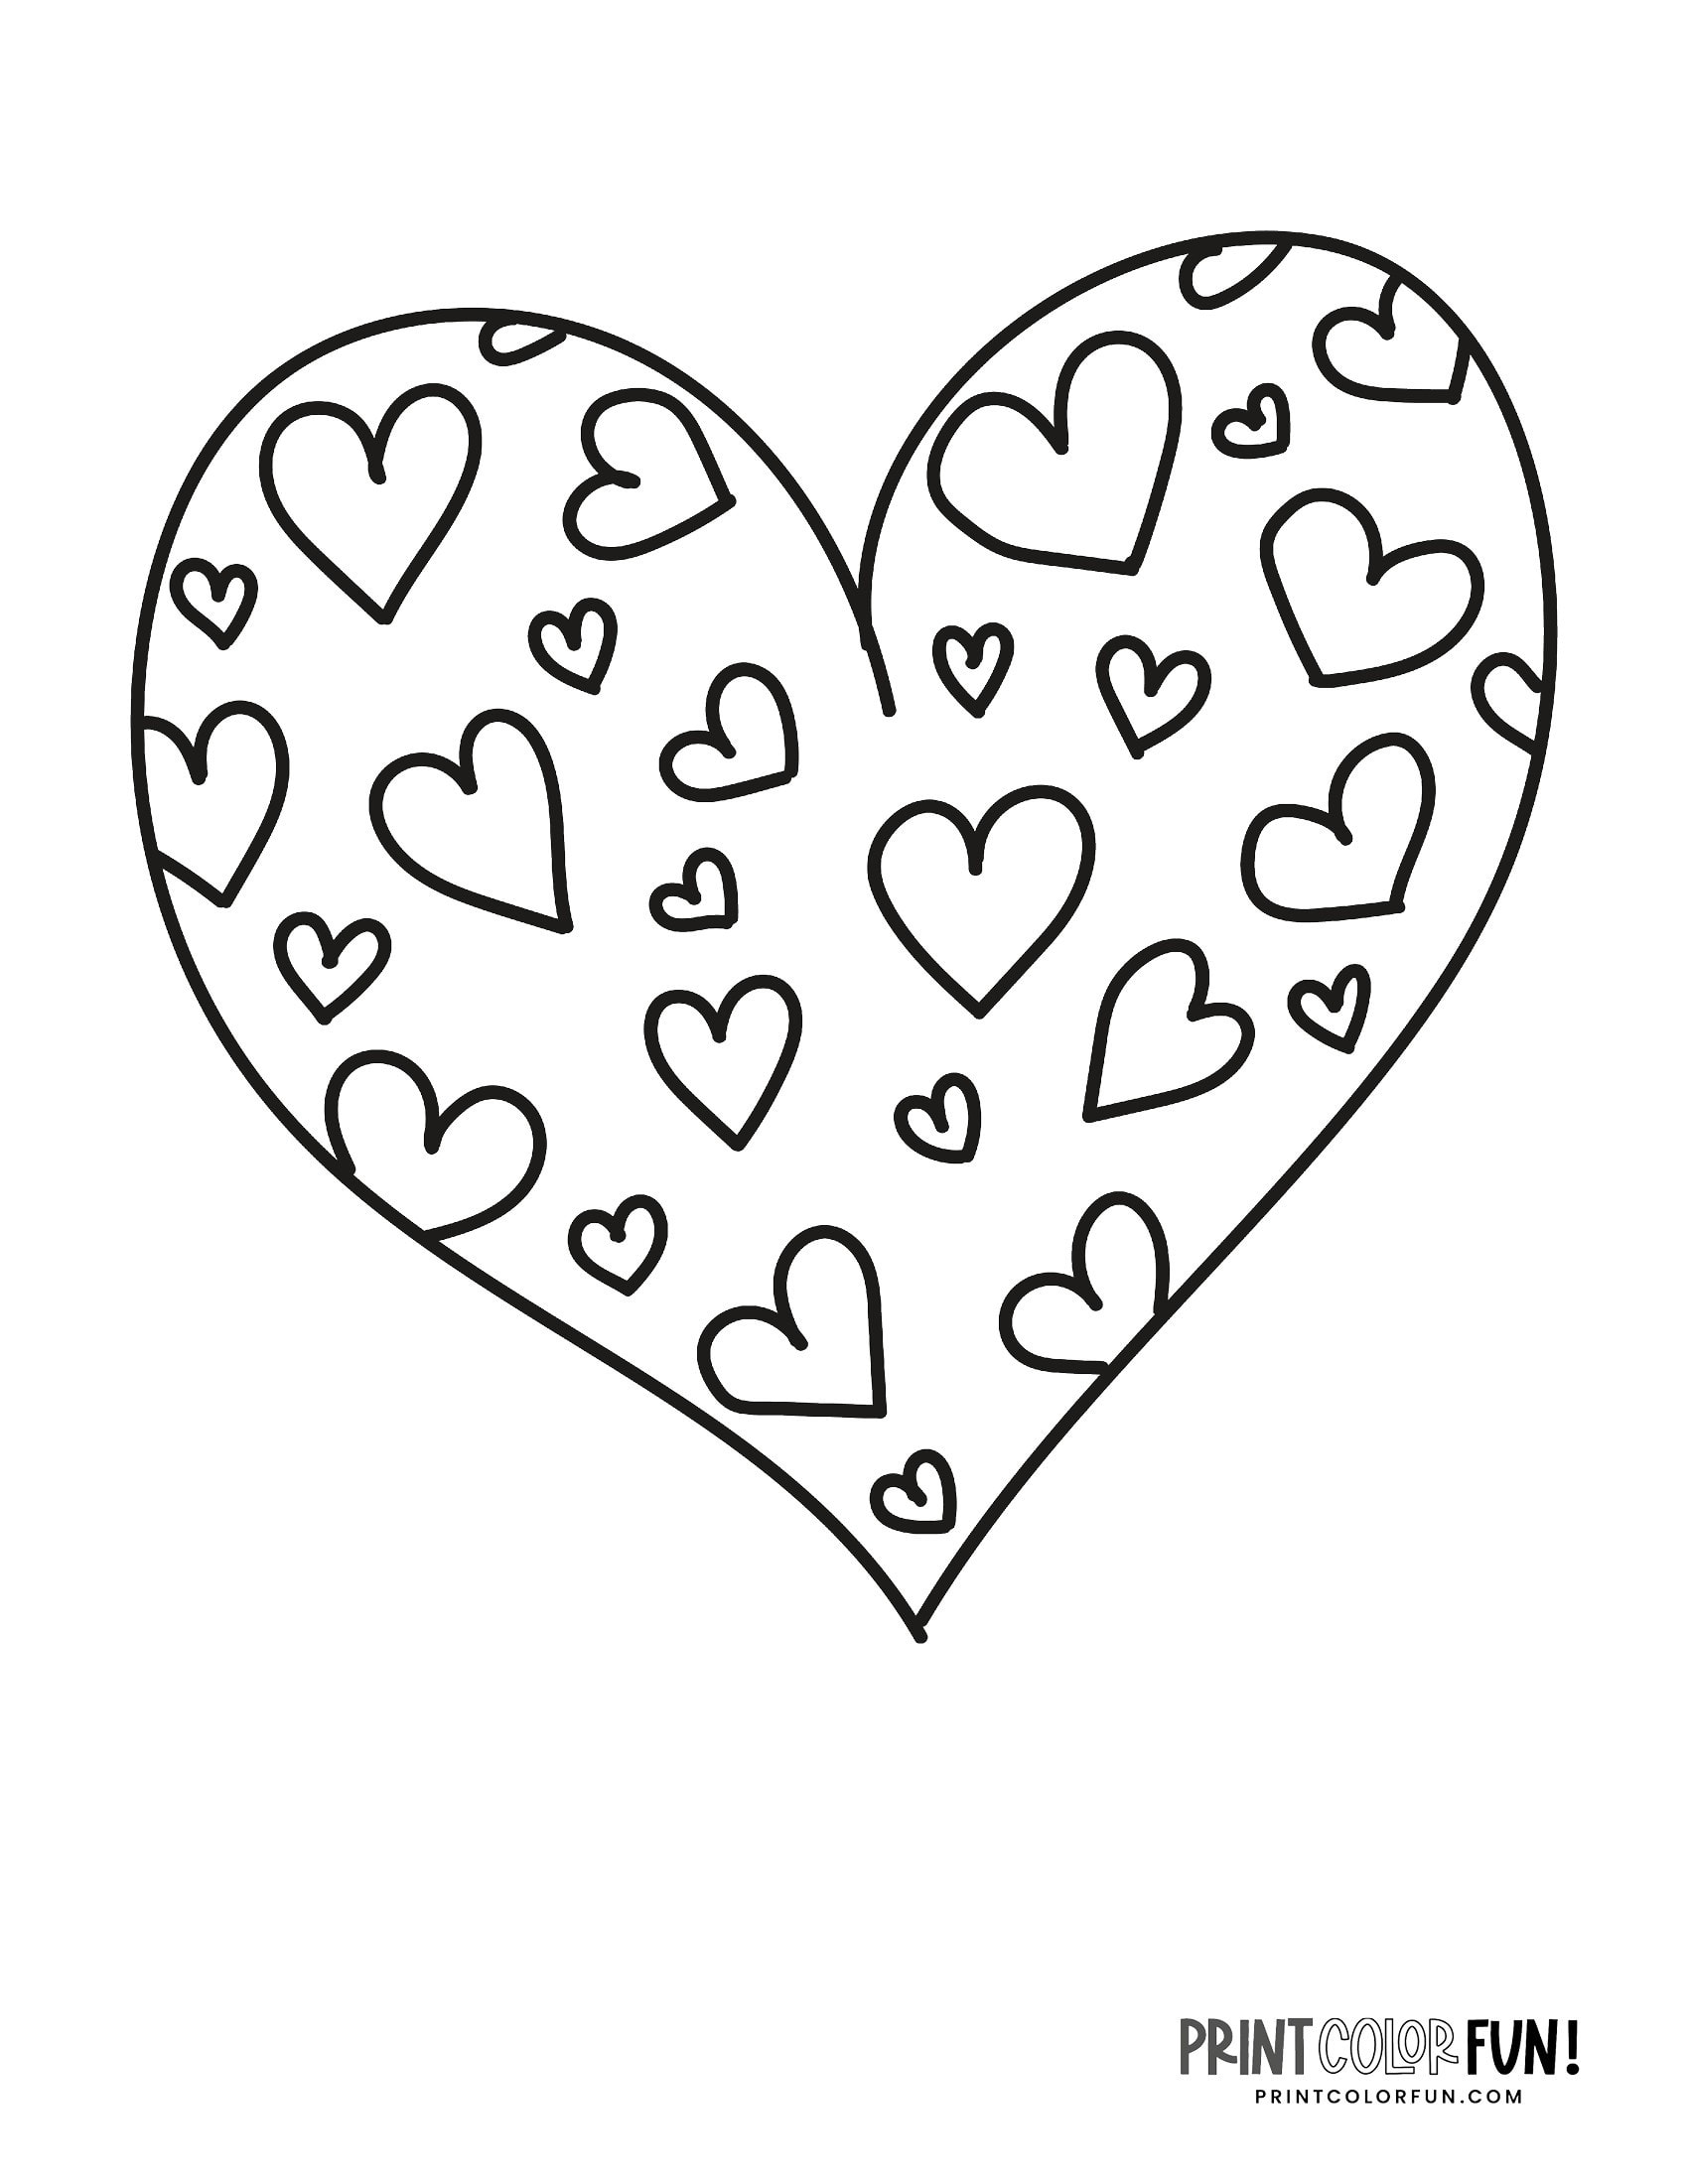 100  heart coloring pages: A huge collection of free Valentine #39 s Day